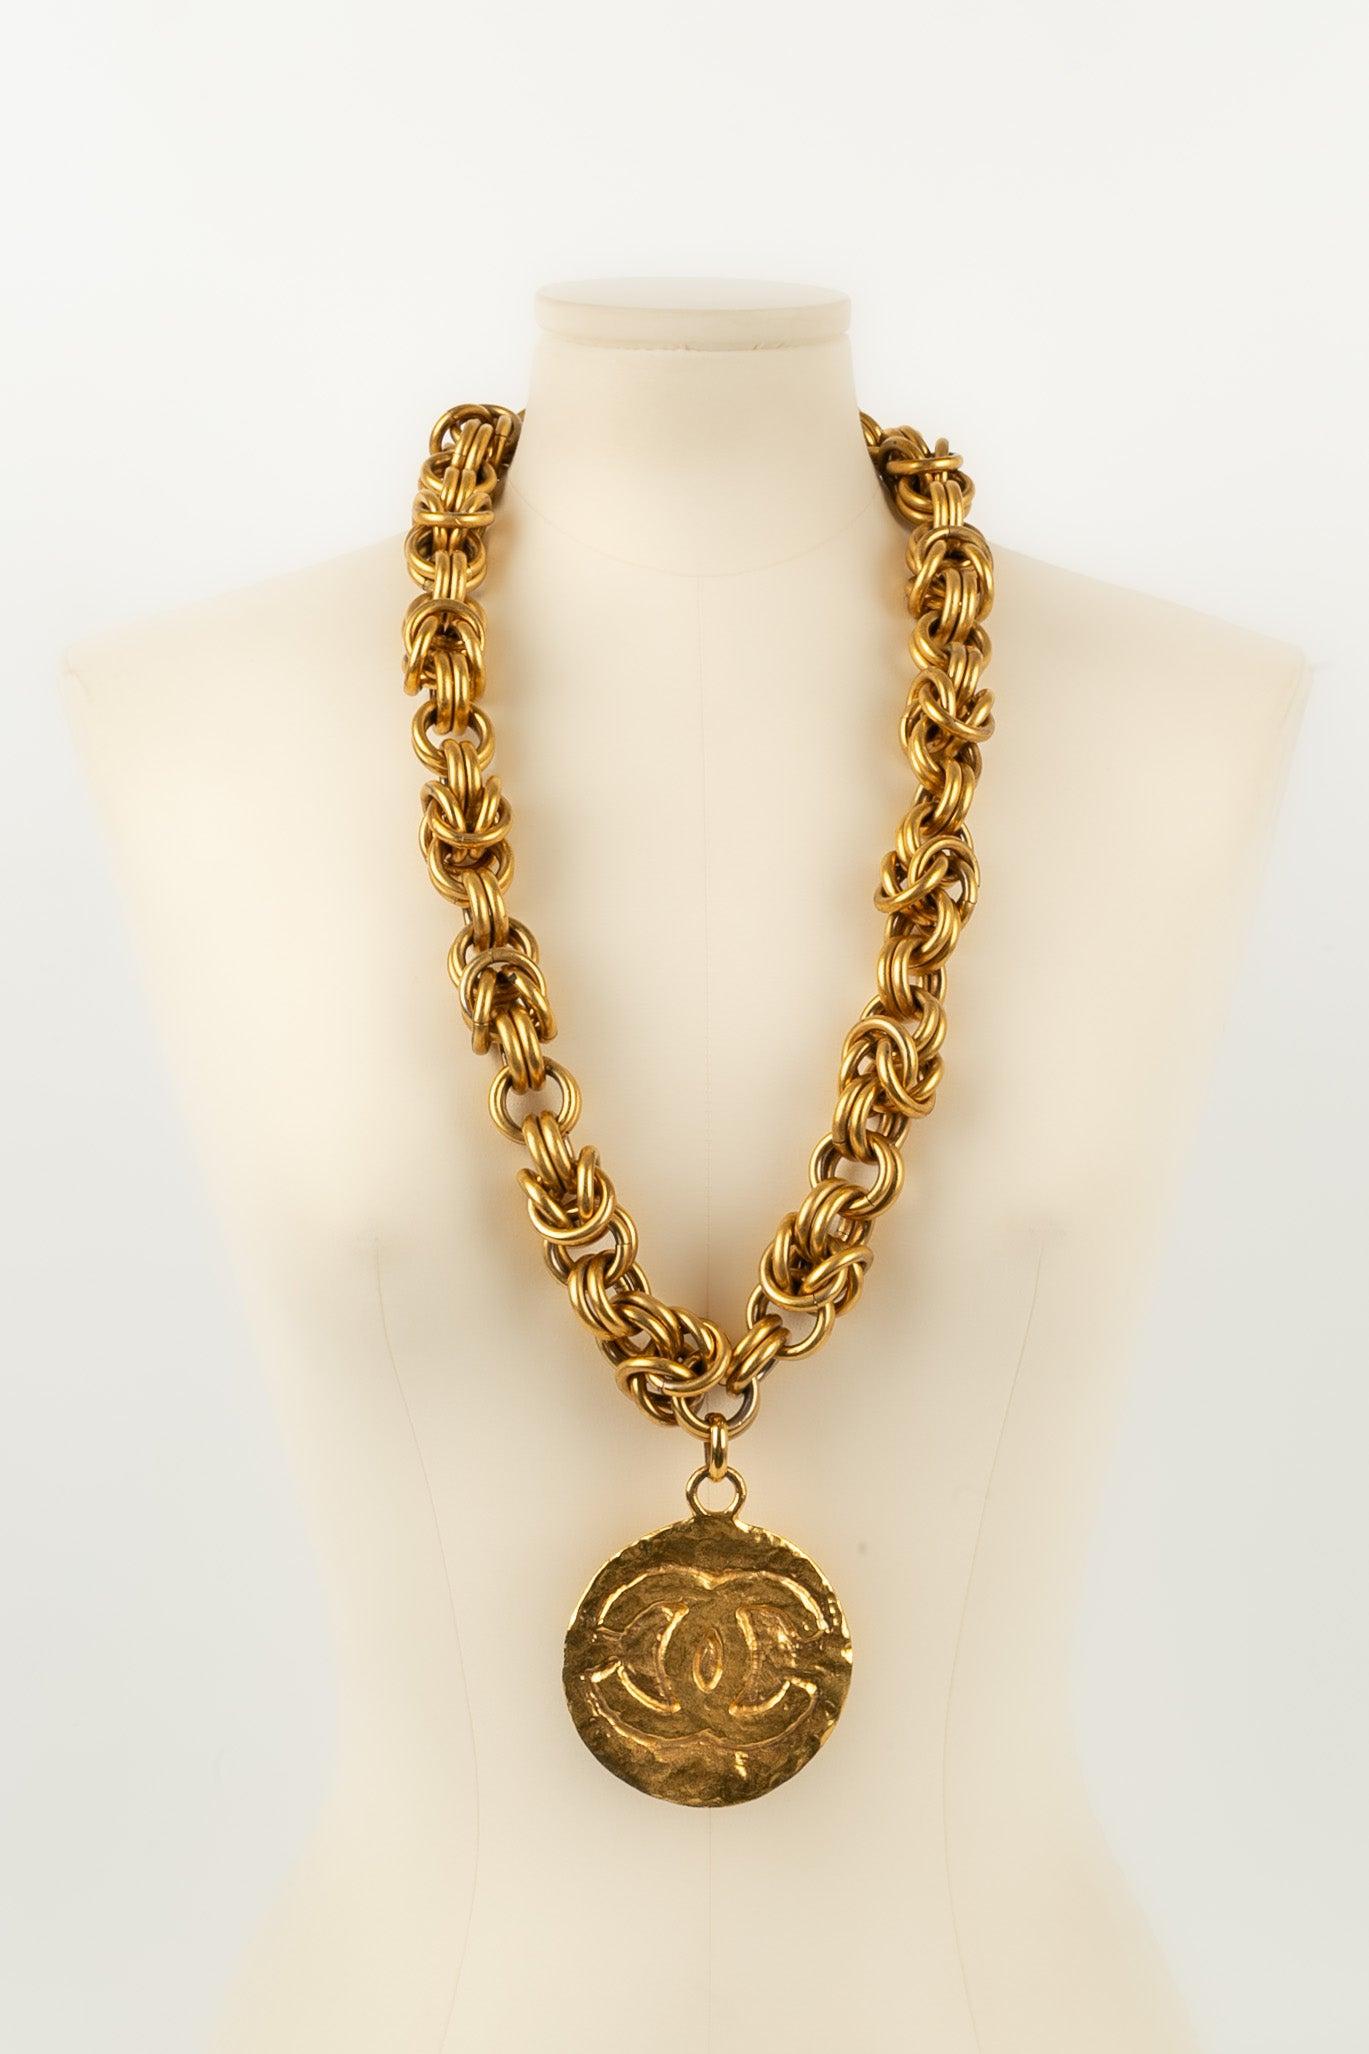 Chanel Impressive Haute Couture Necklace in Gold-Plated Metal with a CC Pendant For Sale 1